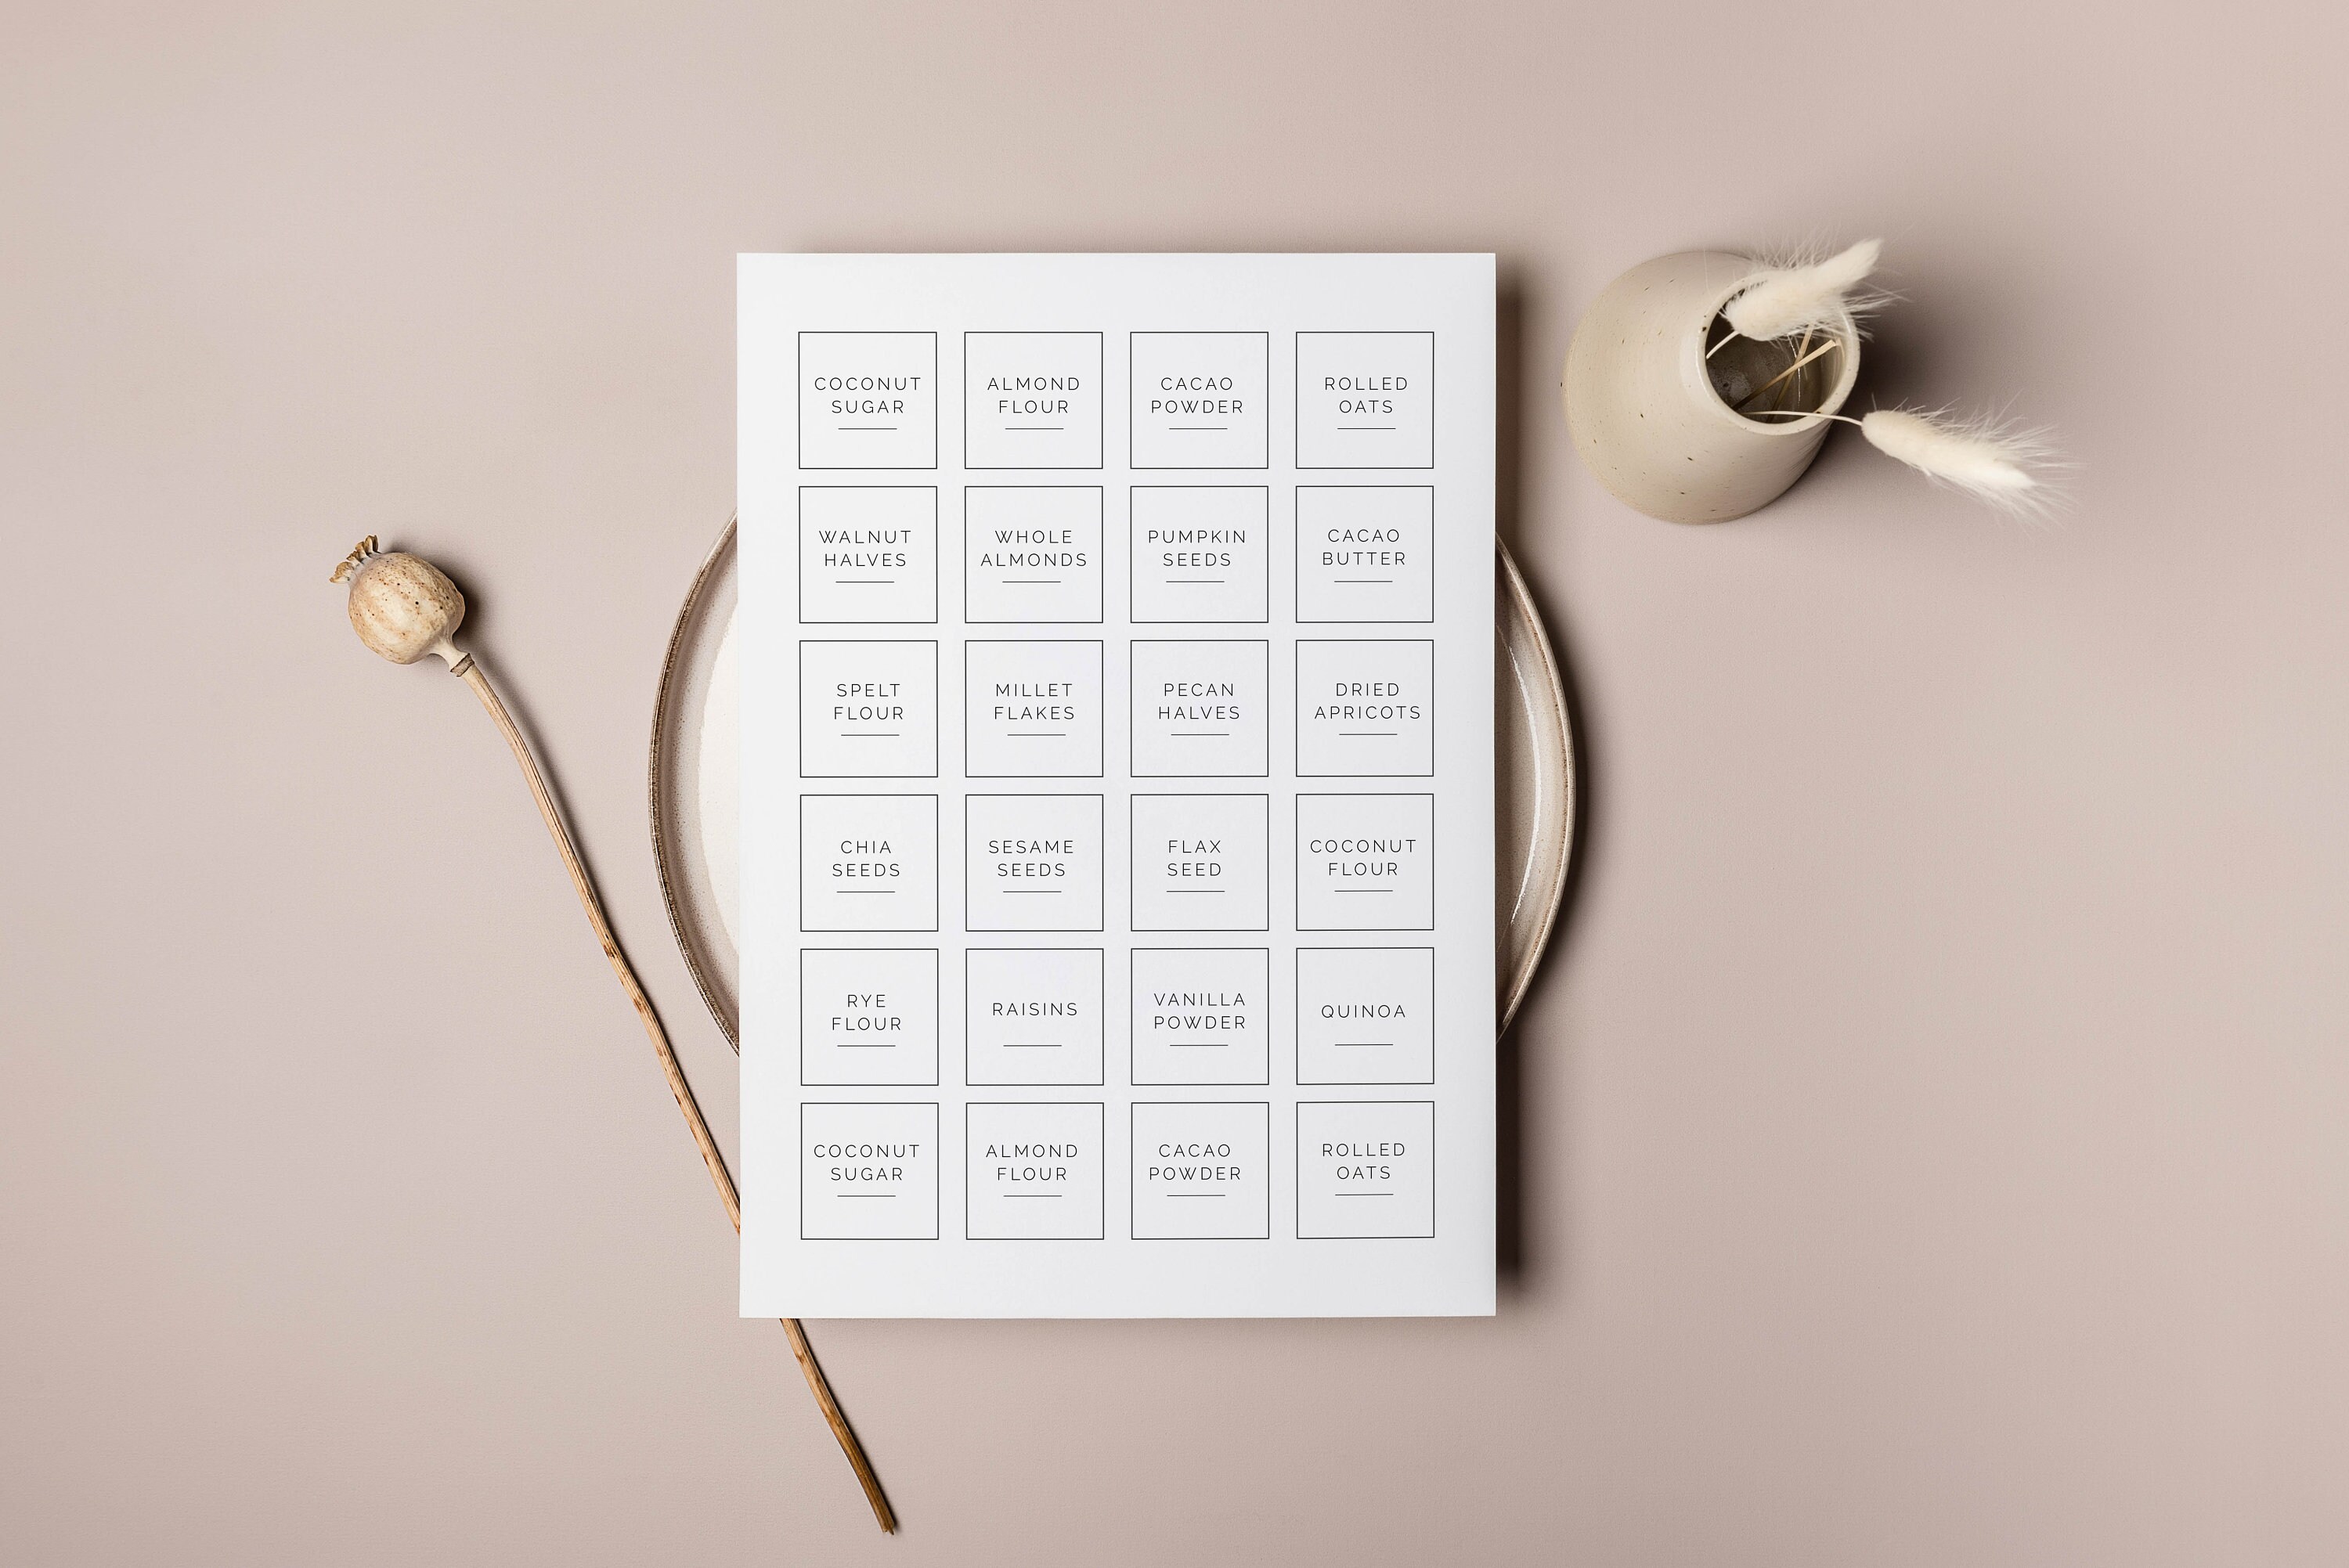 50+ Customizable Food Label Templates to Make Your Pantry Dreams Come True